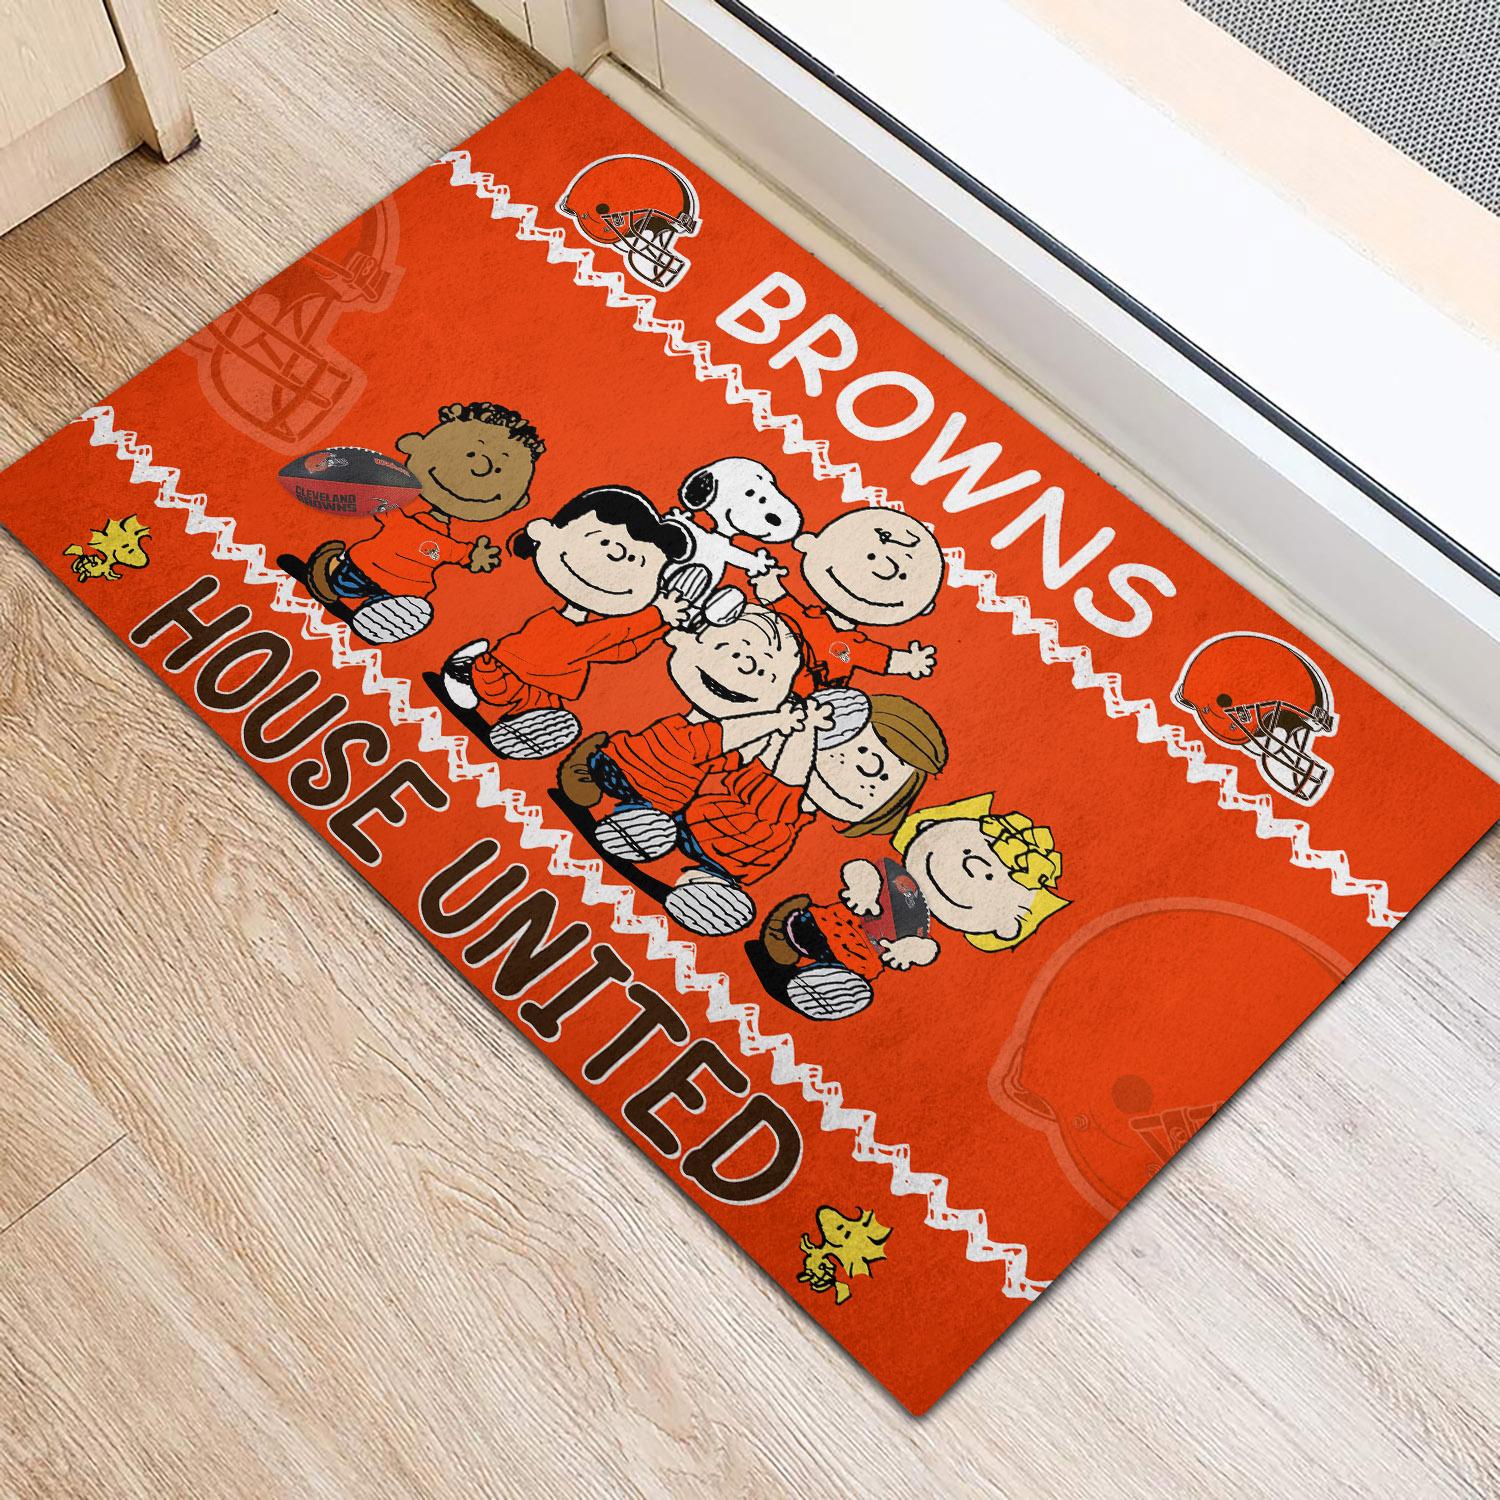 Cleveland Browns Peanuts House United Doormat